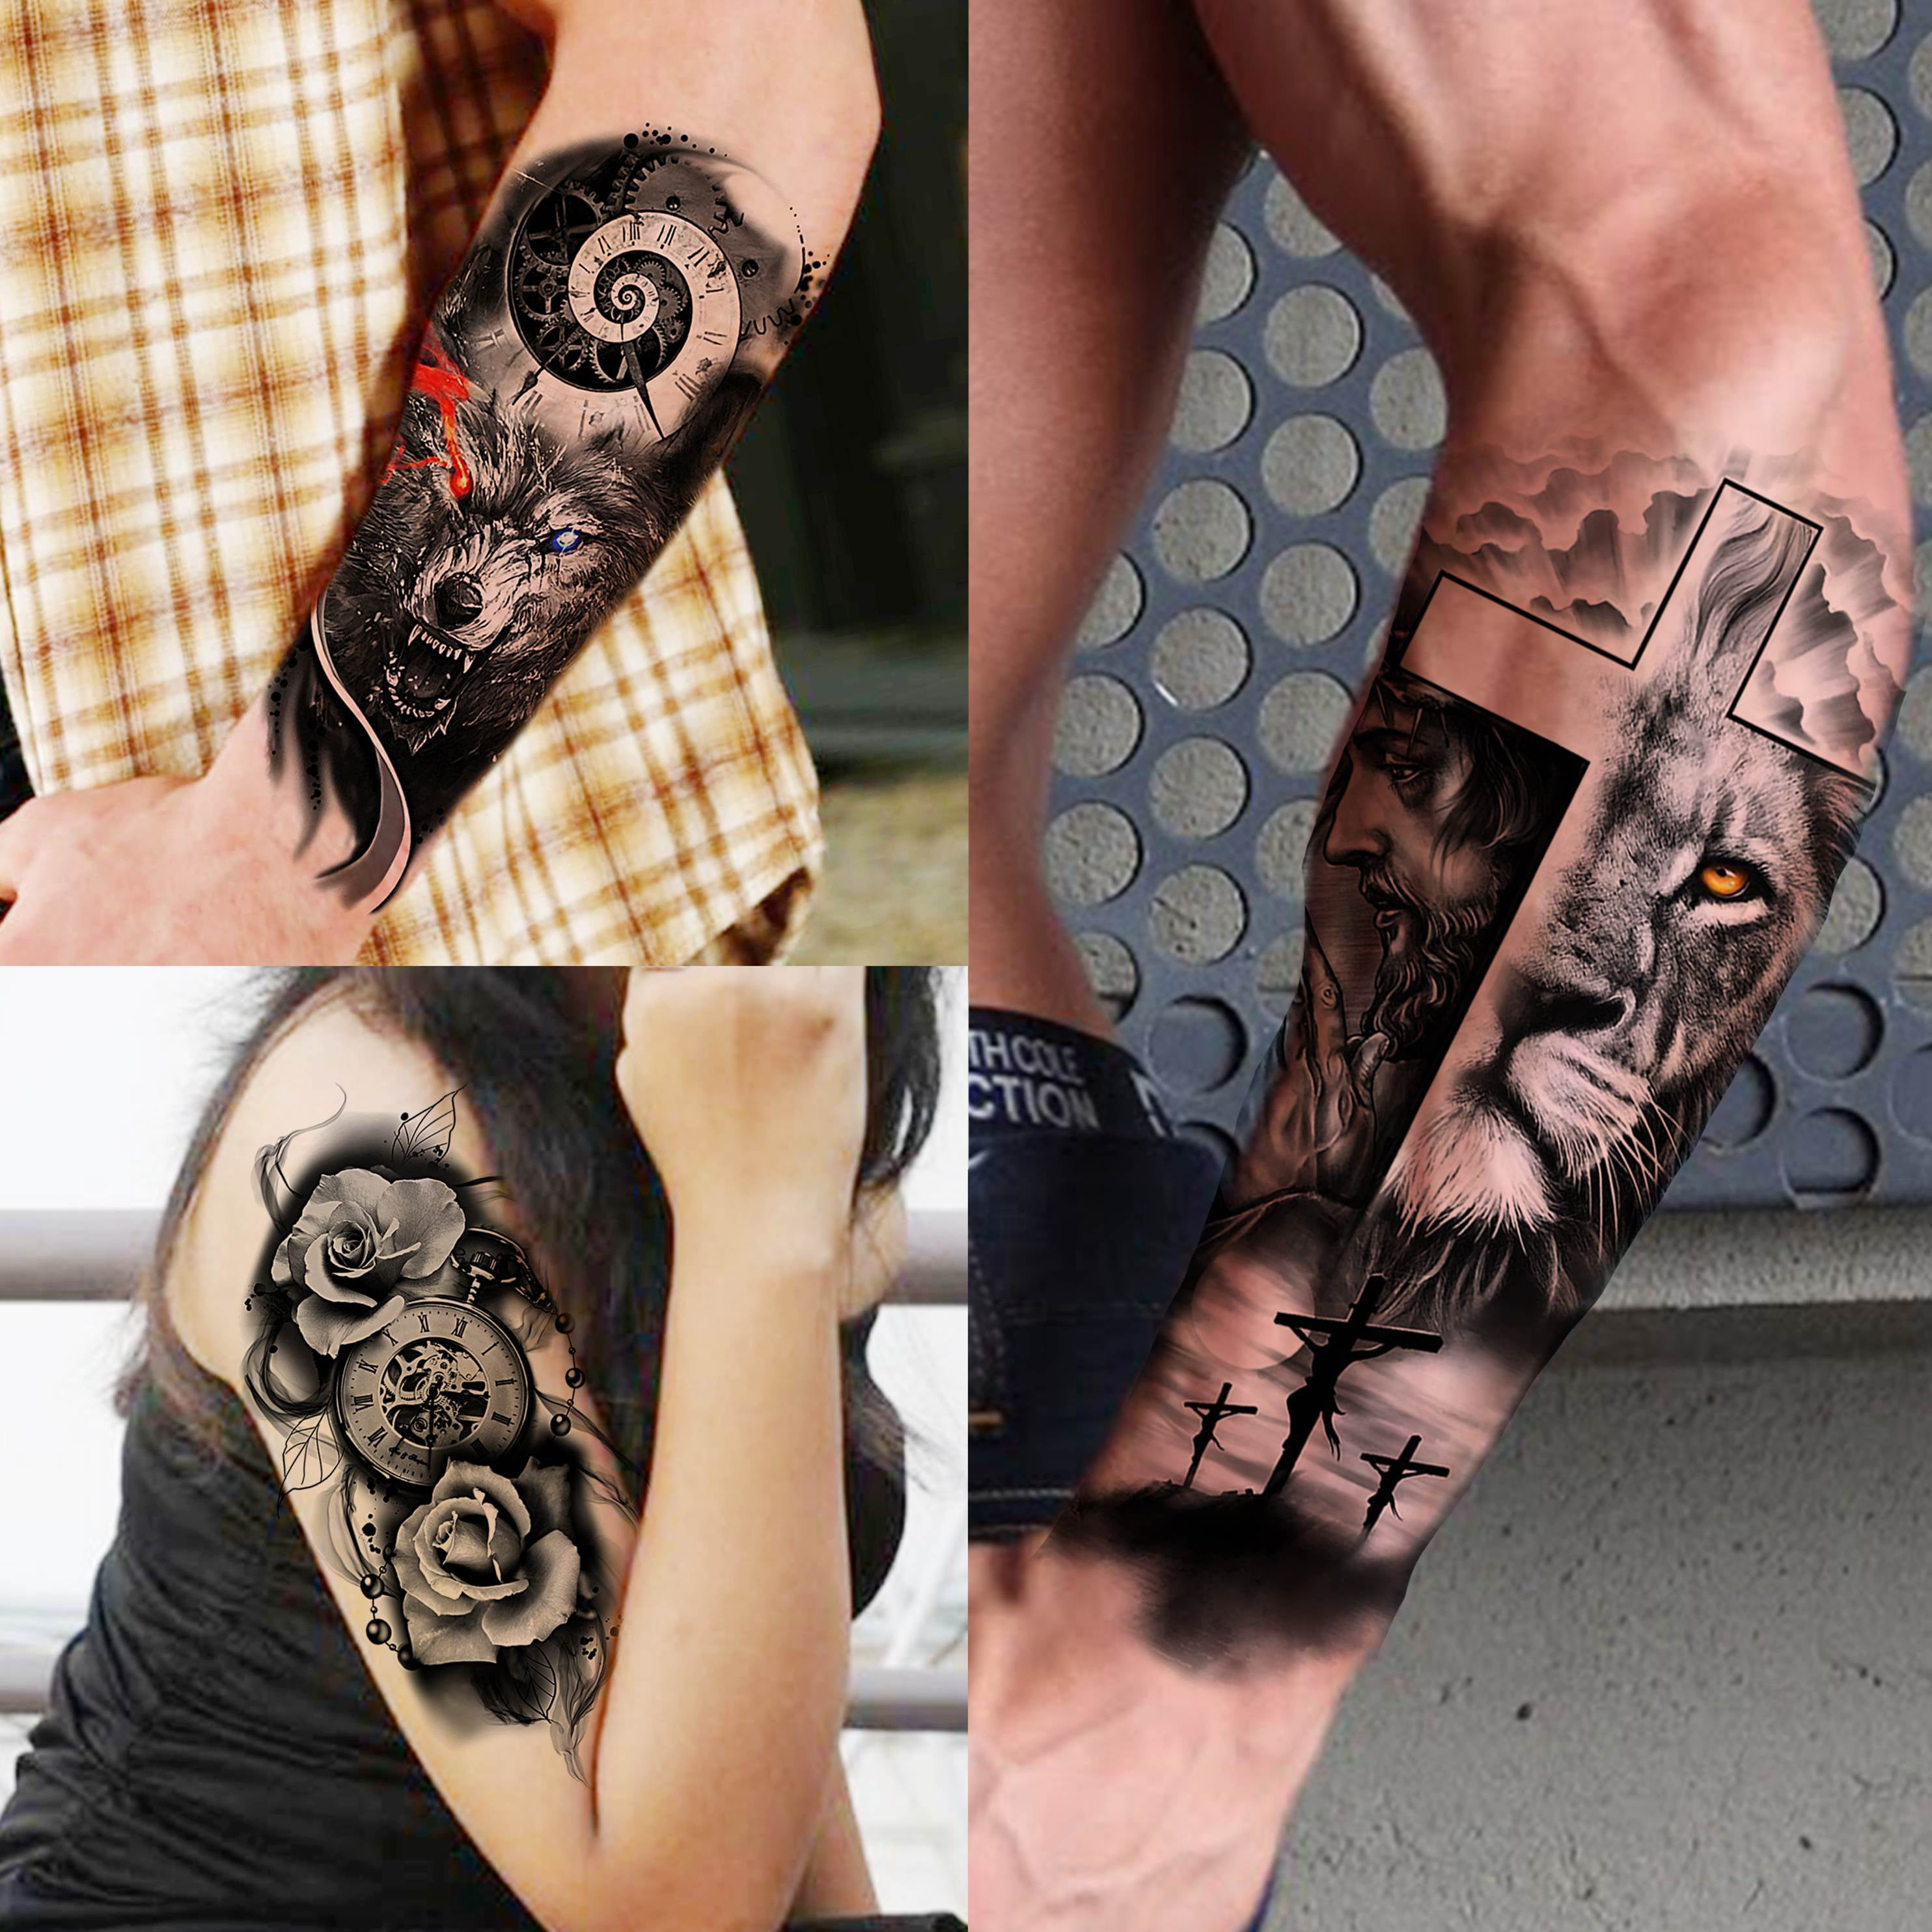 Tattoo uploaded by Sammy Ortega • What I'm looking for in my next tattoo 1.  Tiger with rose 2. Entire forearm. 3. Right forearm. 4. Realism with UV ink  in the eyes